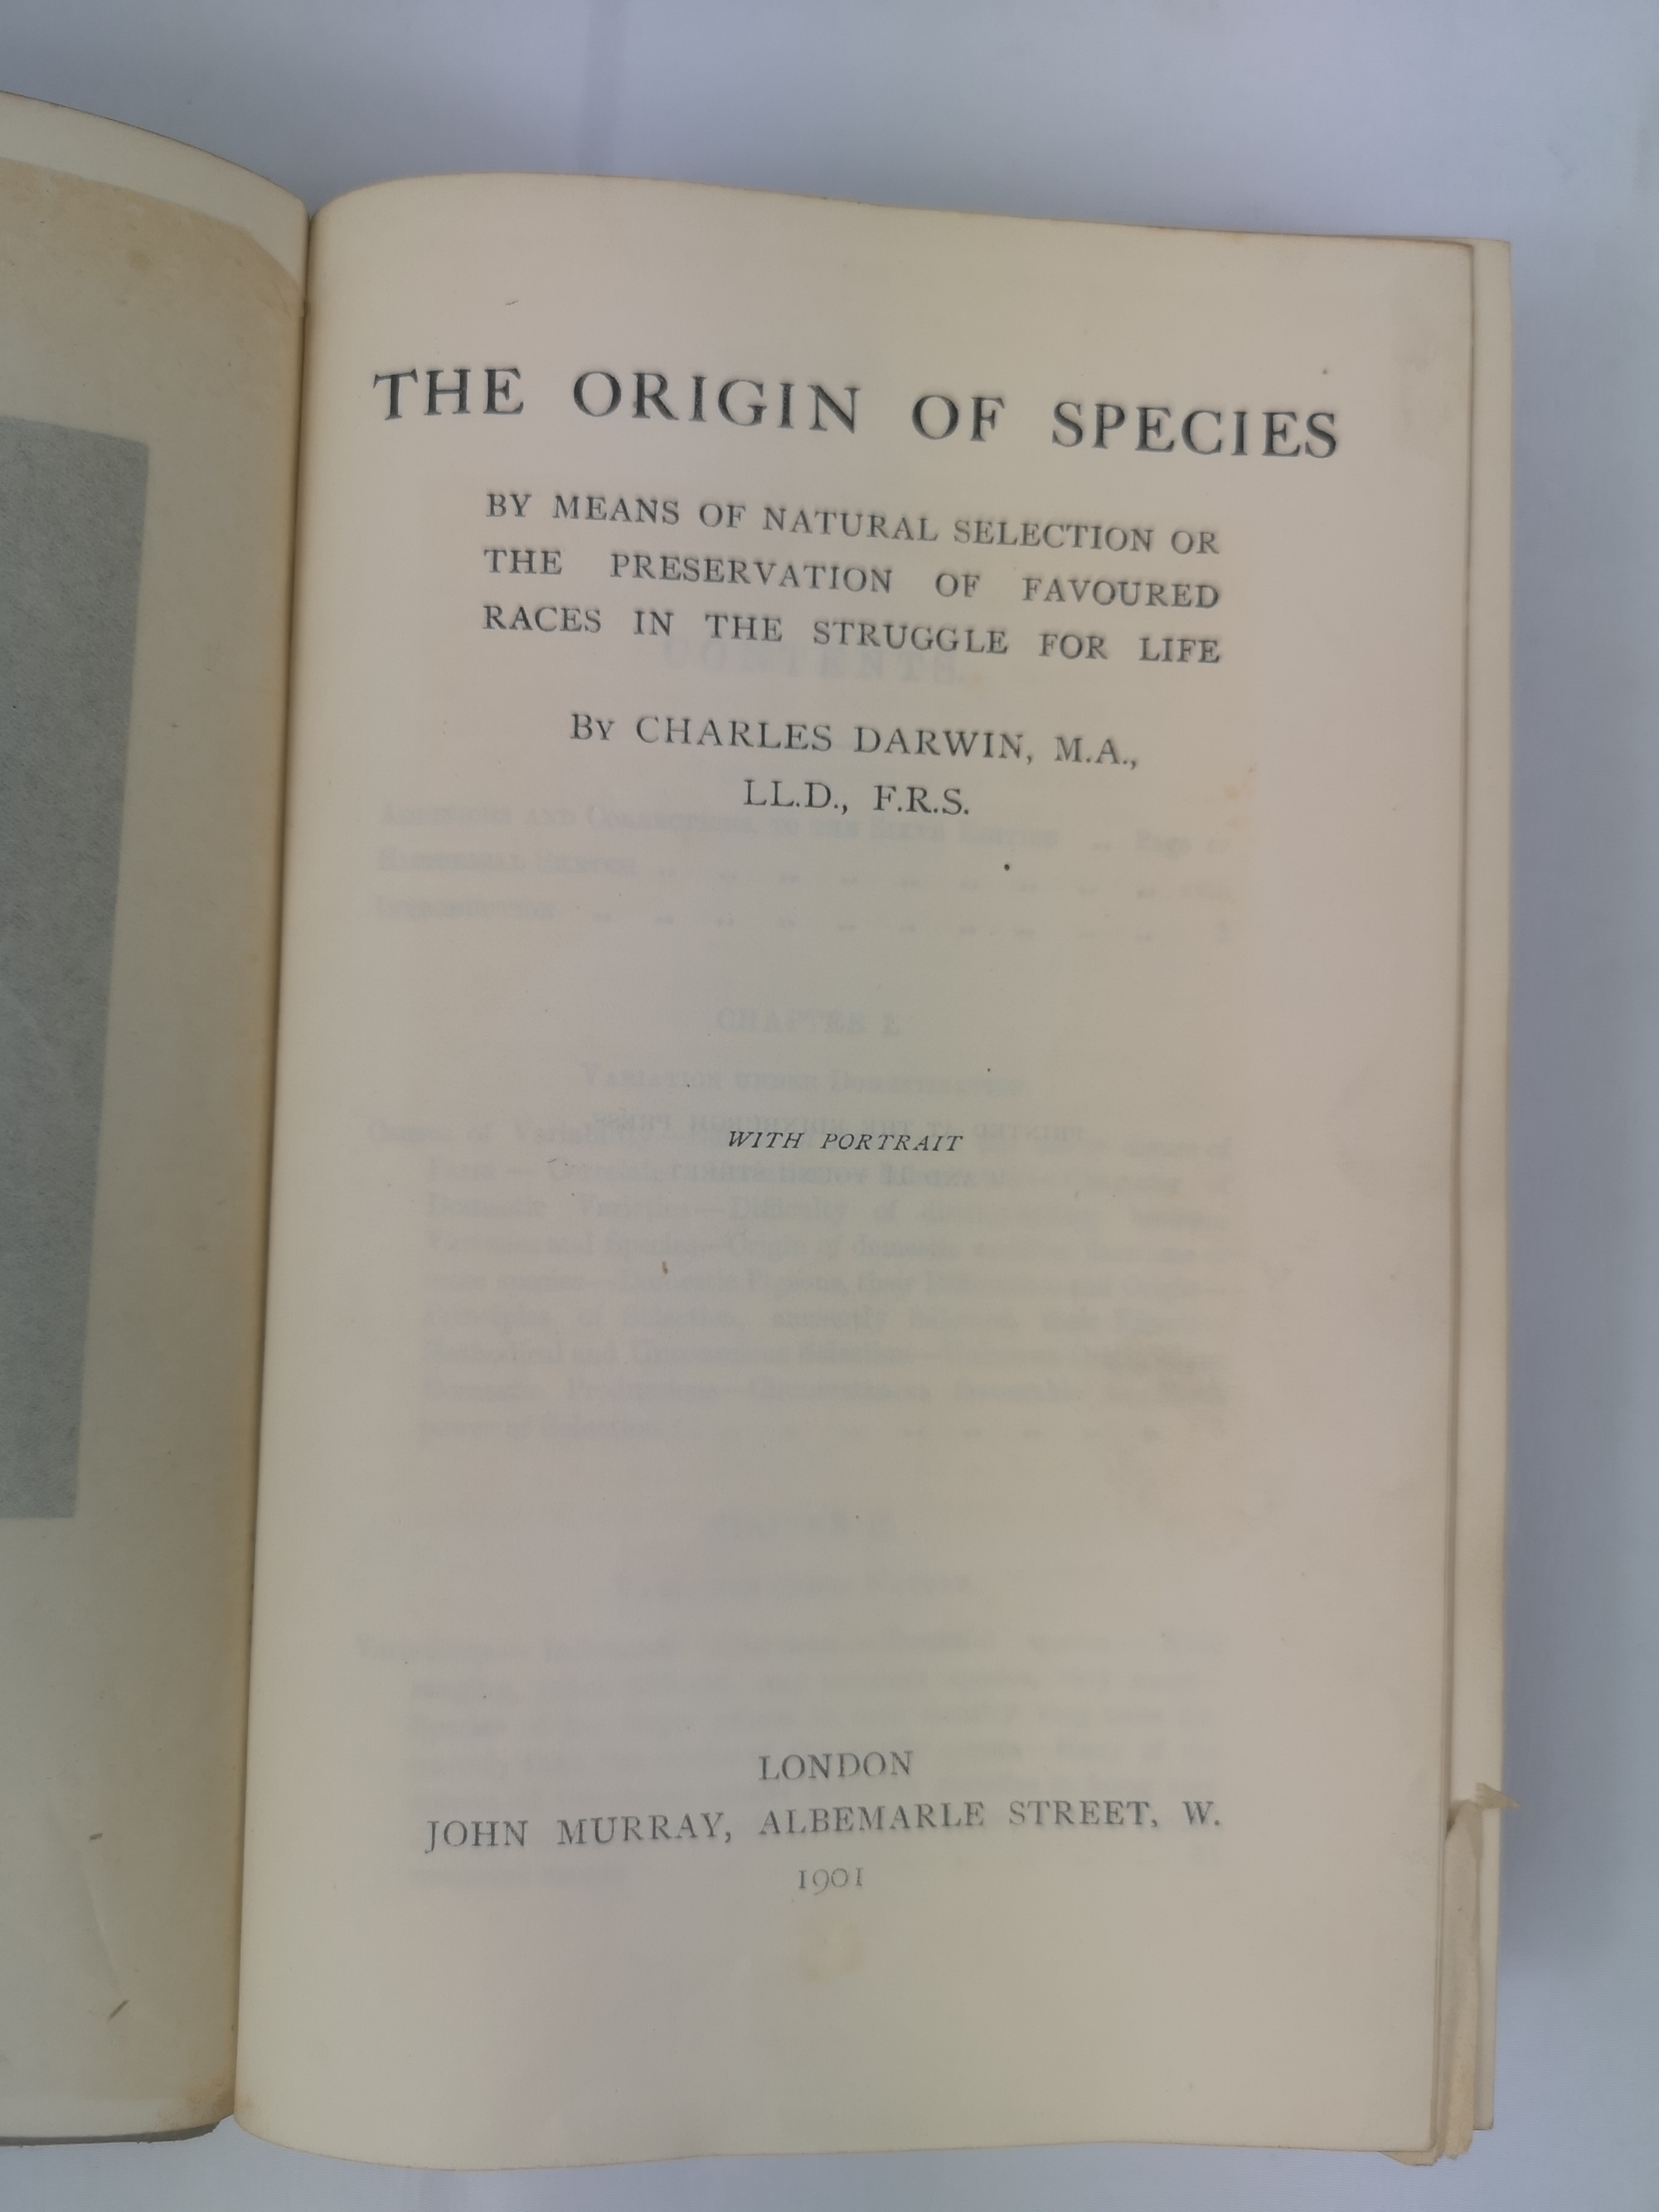 The Origin of Species by Charles Darwin, leather bound, published John Murray, 1901 - Image 2 of 5